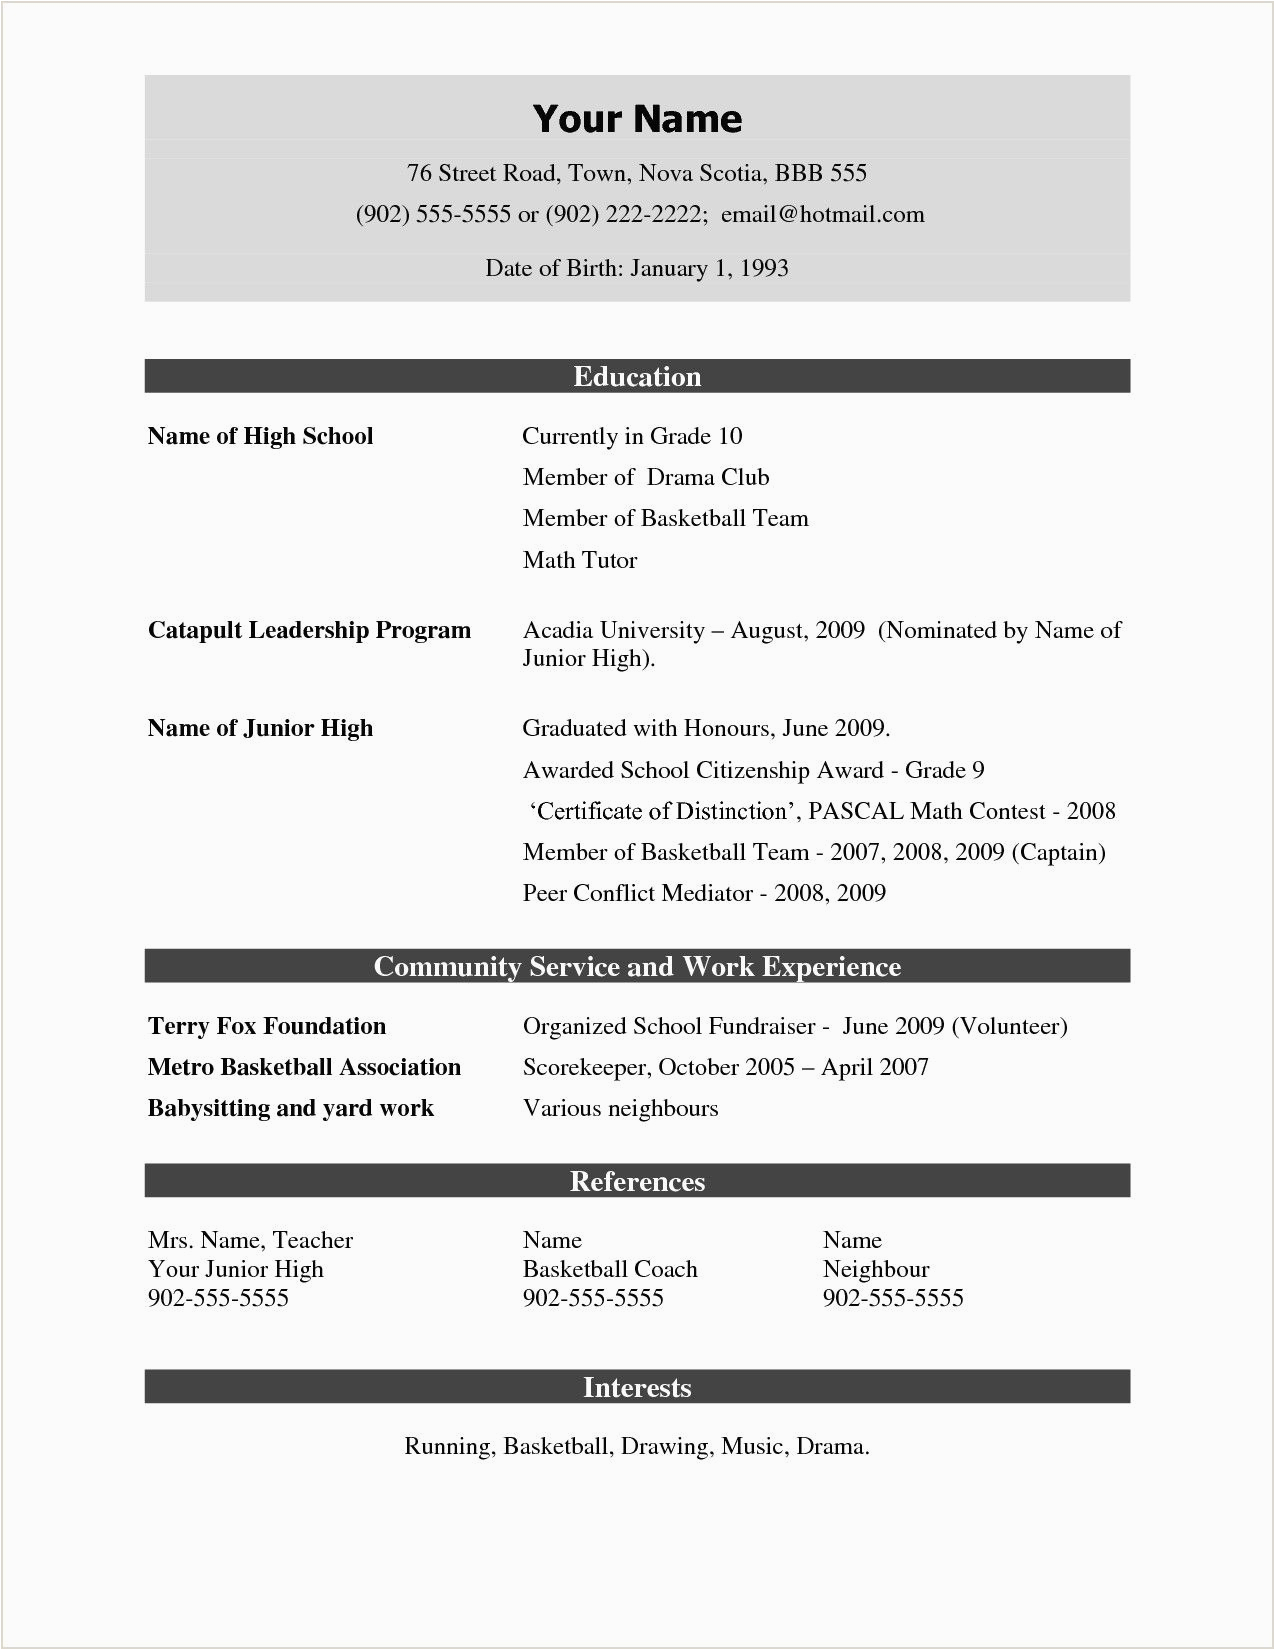 Resume Template Download for Engineering Freshers Fresher Teacher Resume format Download Best Resume Examples